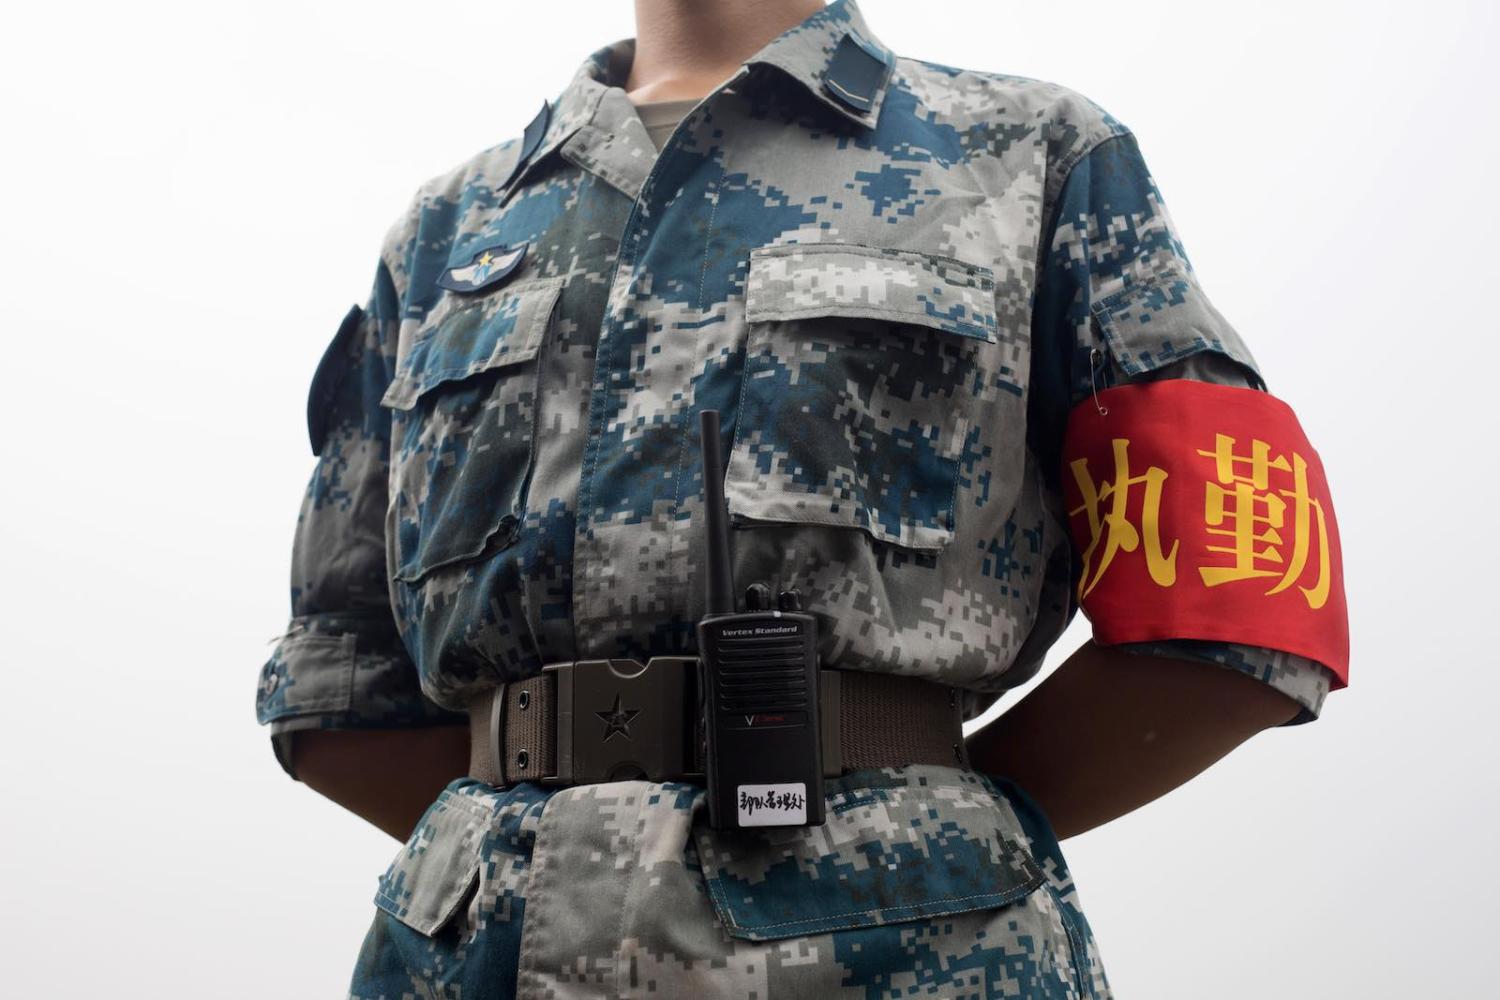 China is seeking to make its military leaner and meaner with technological advancements (Photo: Paul Yeung via Getty)